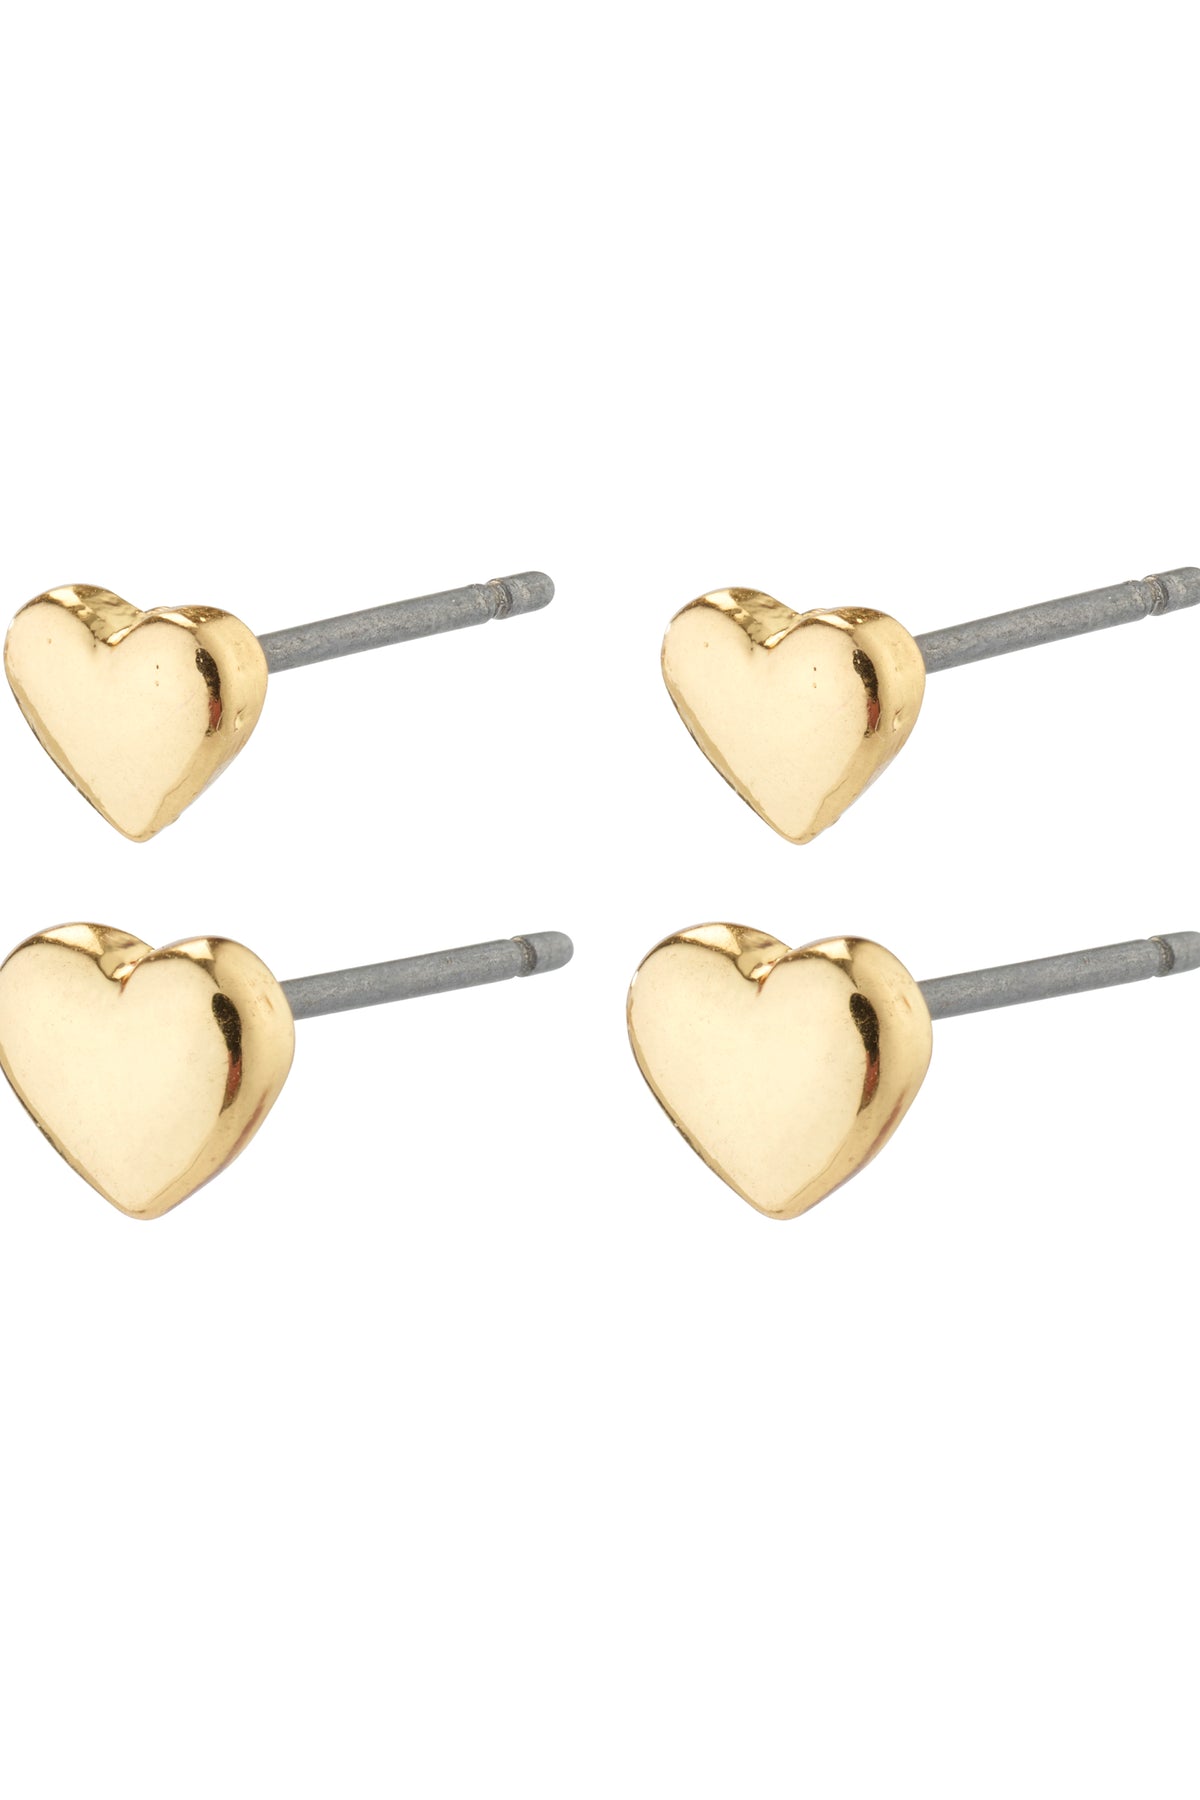 Afroditte Recycled Heart Earrings Gold Plated